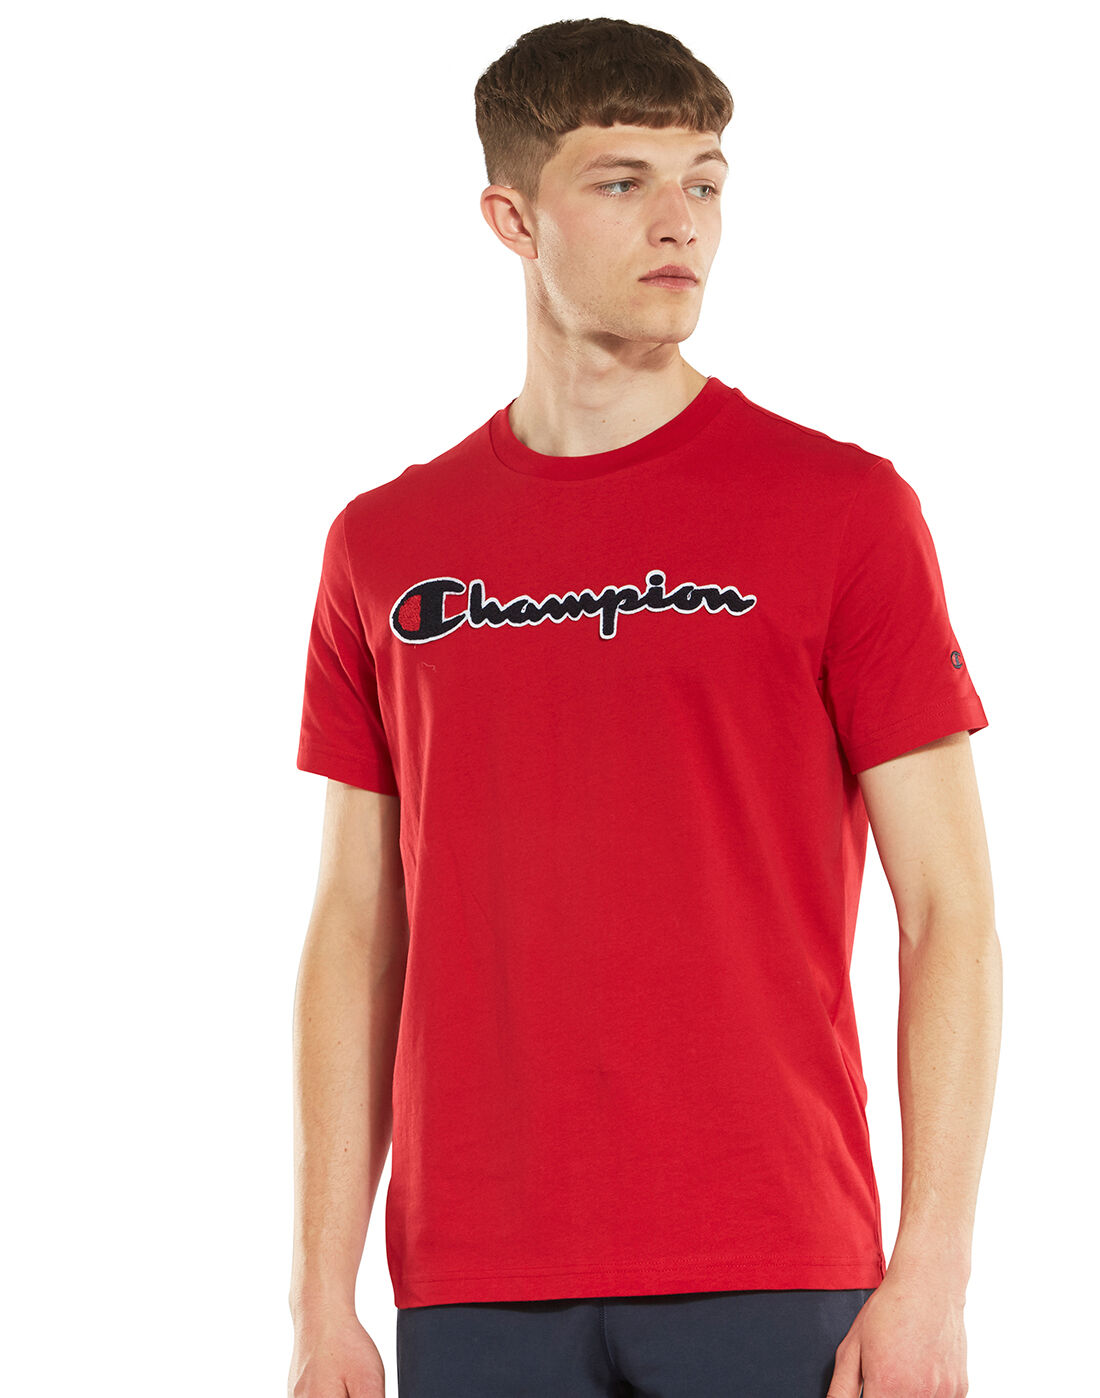 CHAMPION Neck T Shirt Rustic Red Mens Size UK XXL *REF207 